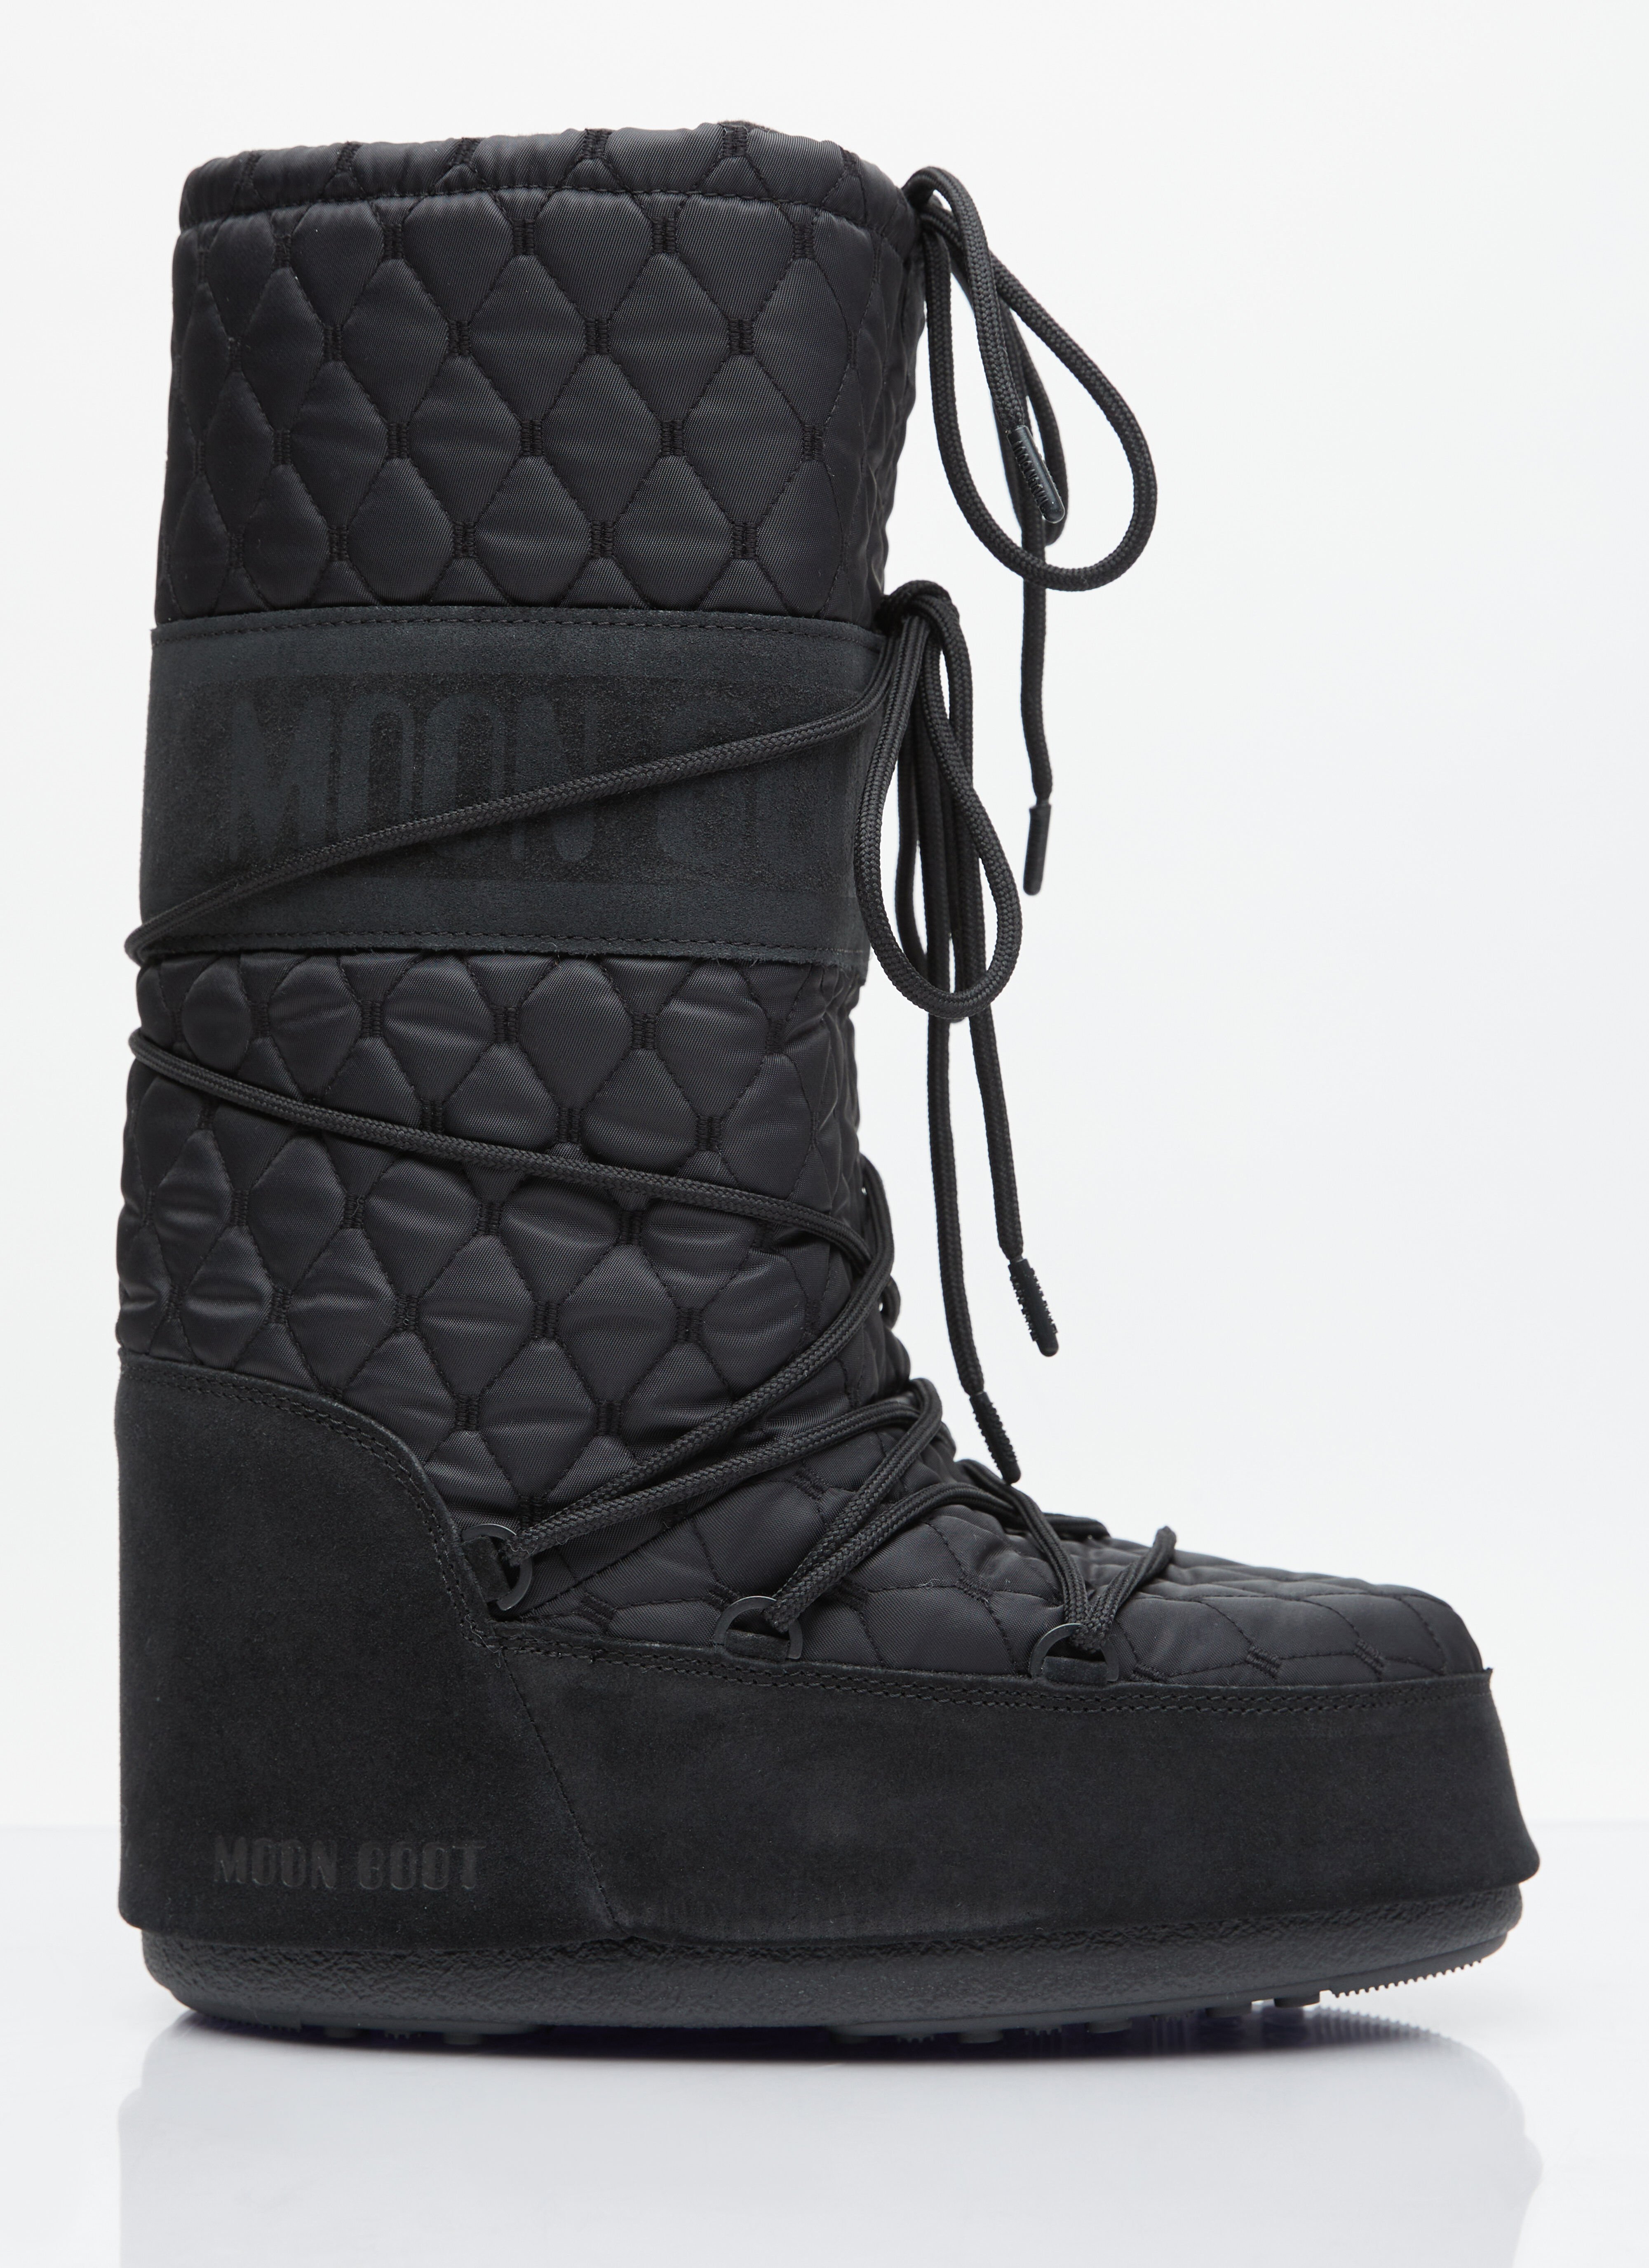 Vivienne Westwood Icon Quilted Boots Grey vvw0156010